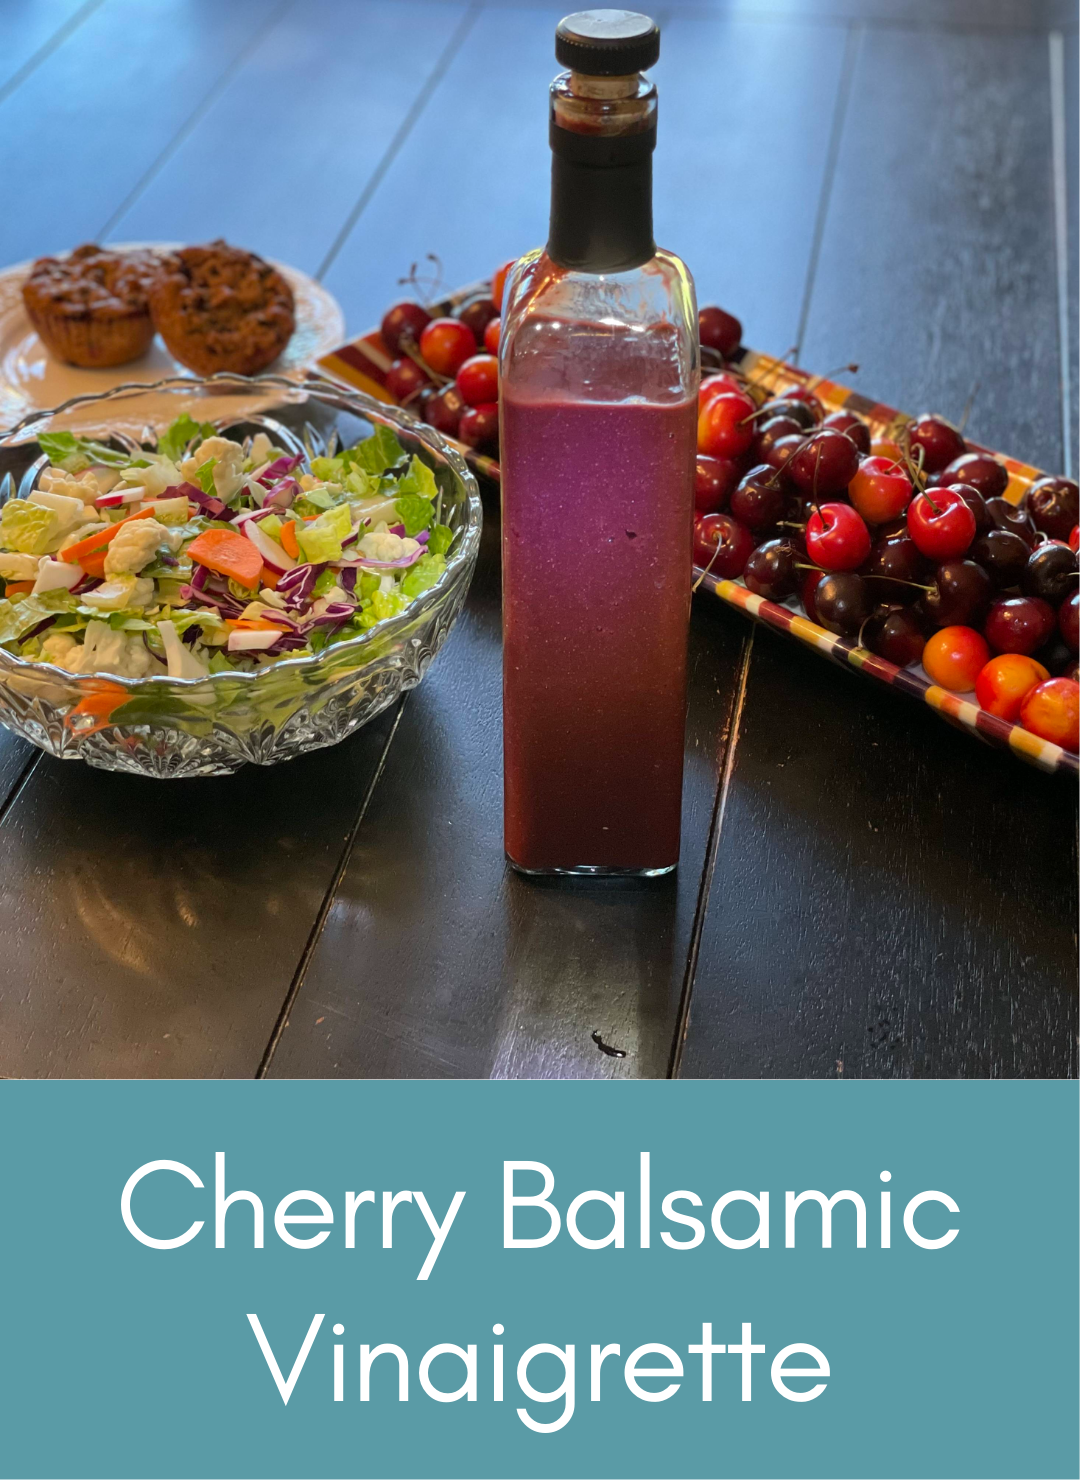 Cherry Balsamic Vinaigrette Picture with link to recipe